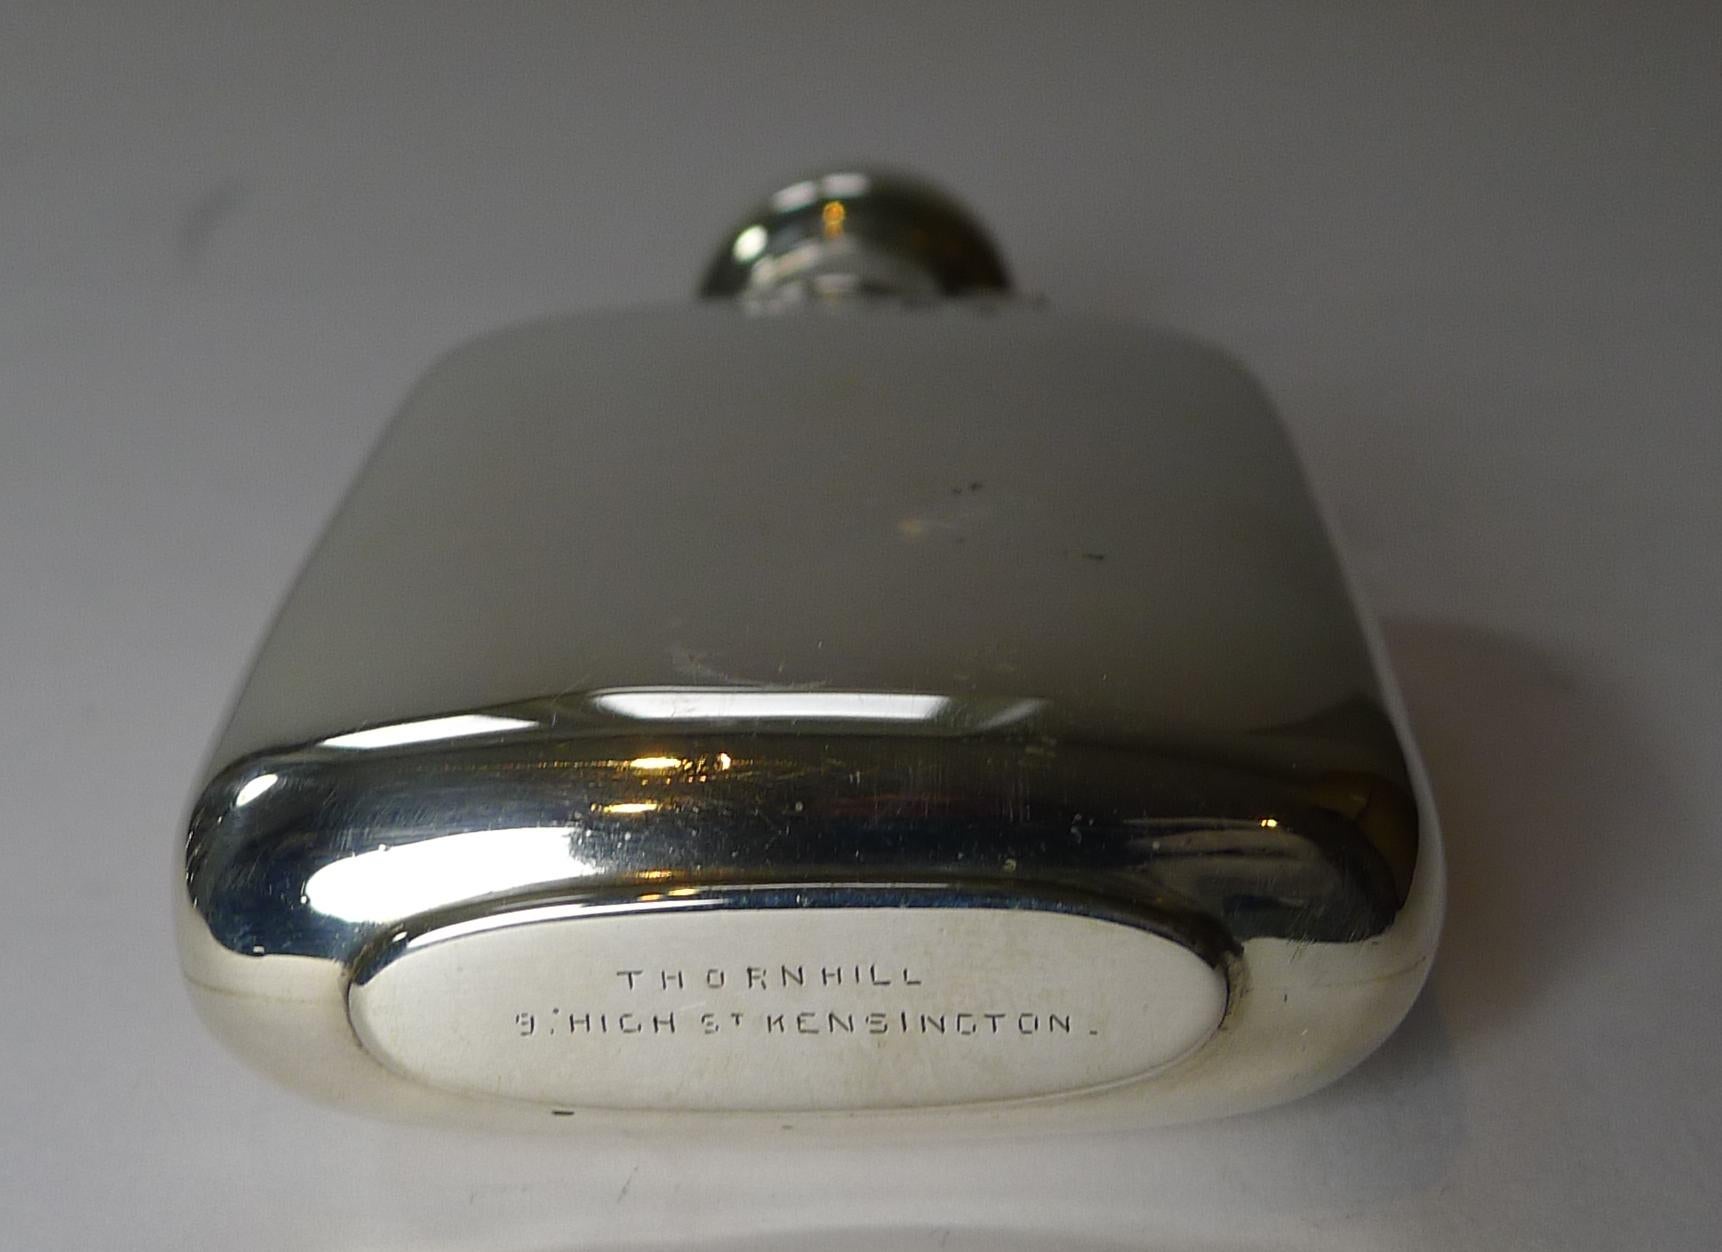 Petite in size, this small English hipflask is made from English sterling silver fully hallmarked for Birmingham 1897, a true Victorian example. The makers mark is also present for E O Marples.

The underside is also signed by the top notch